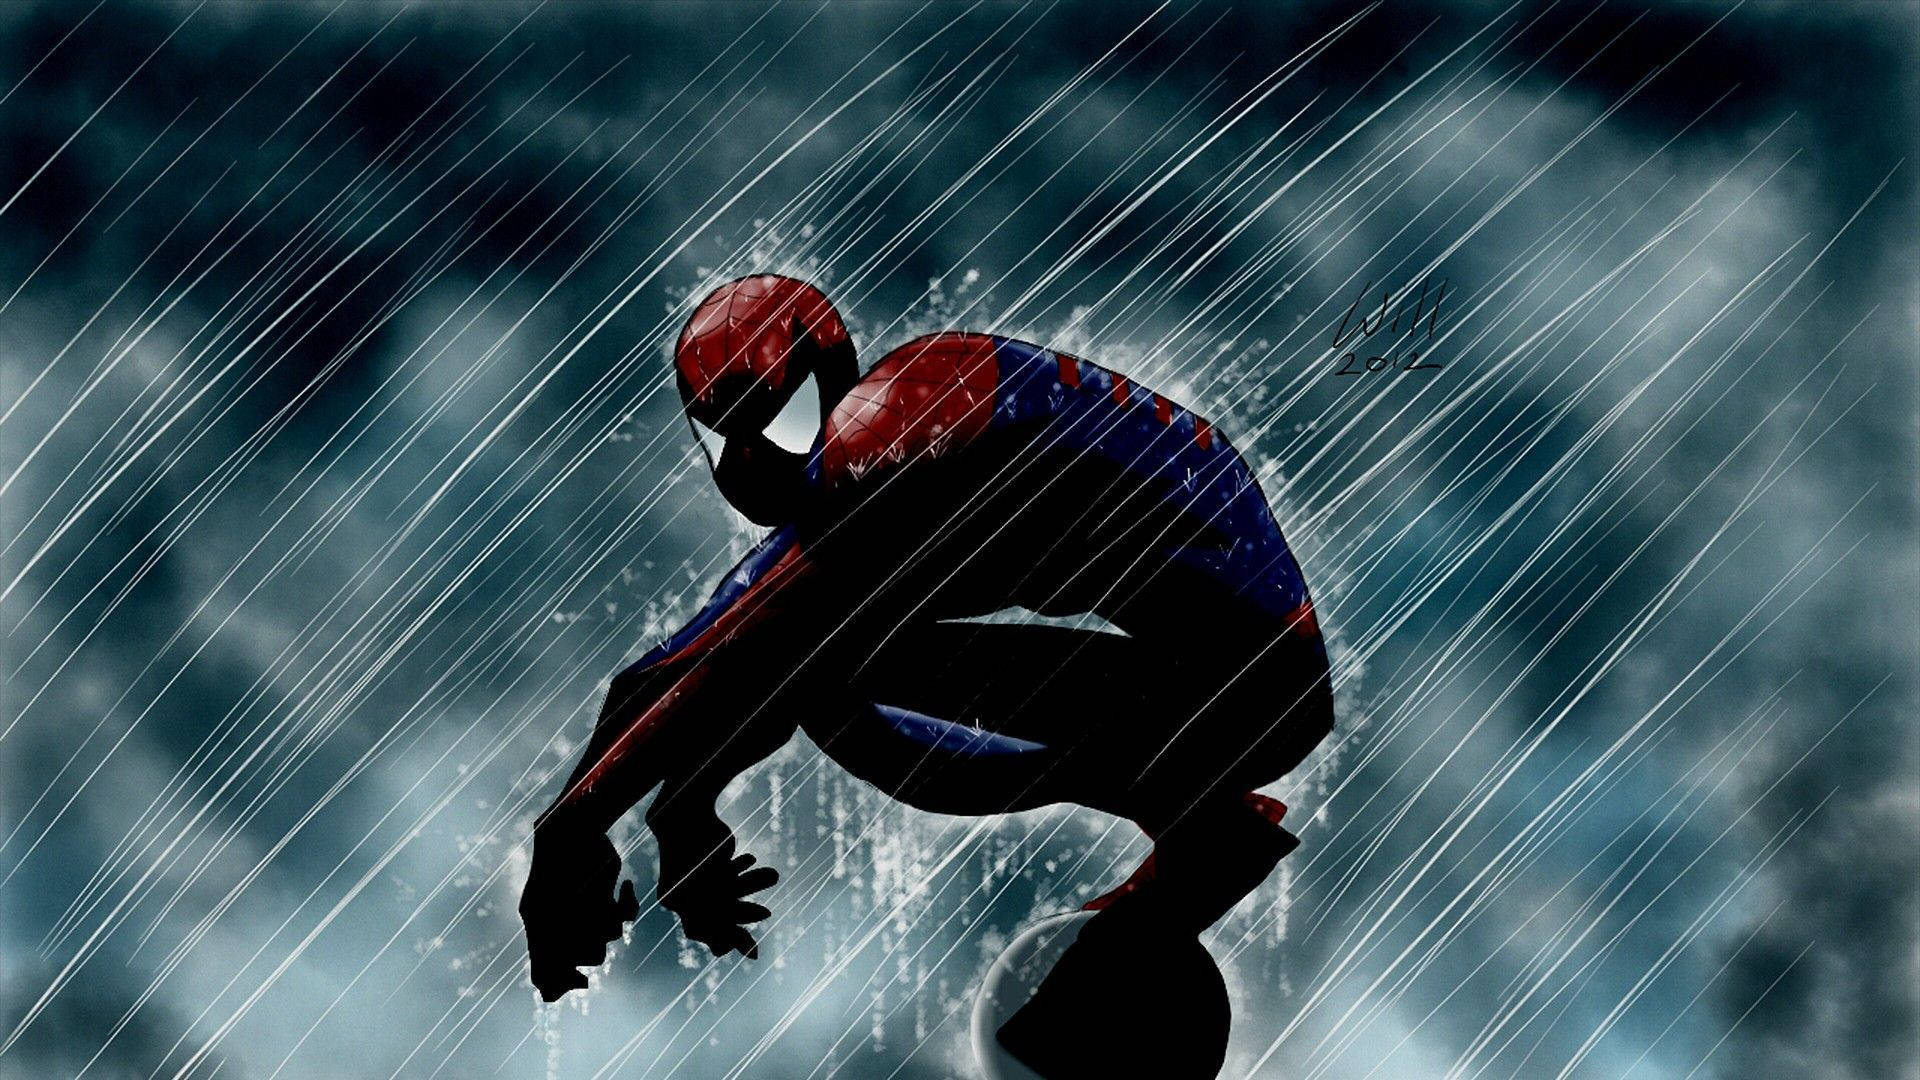 Spiderman sitting outside and getting soaked in the rain. 